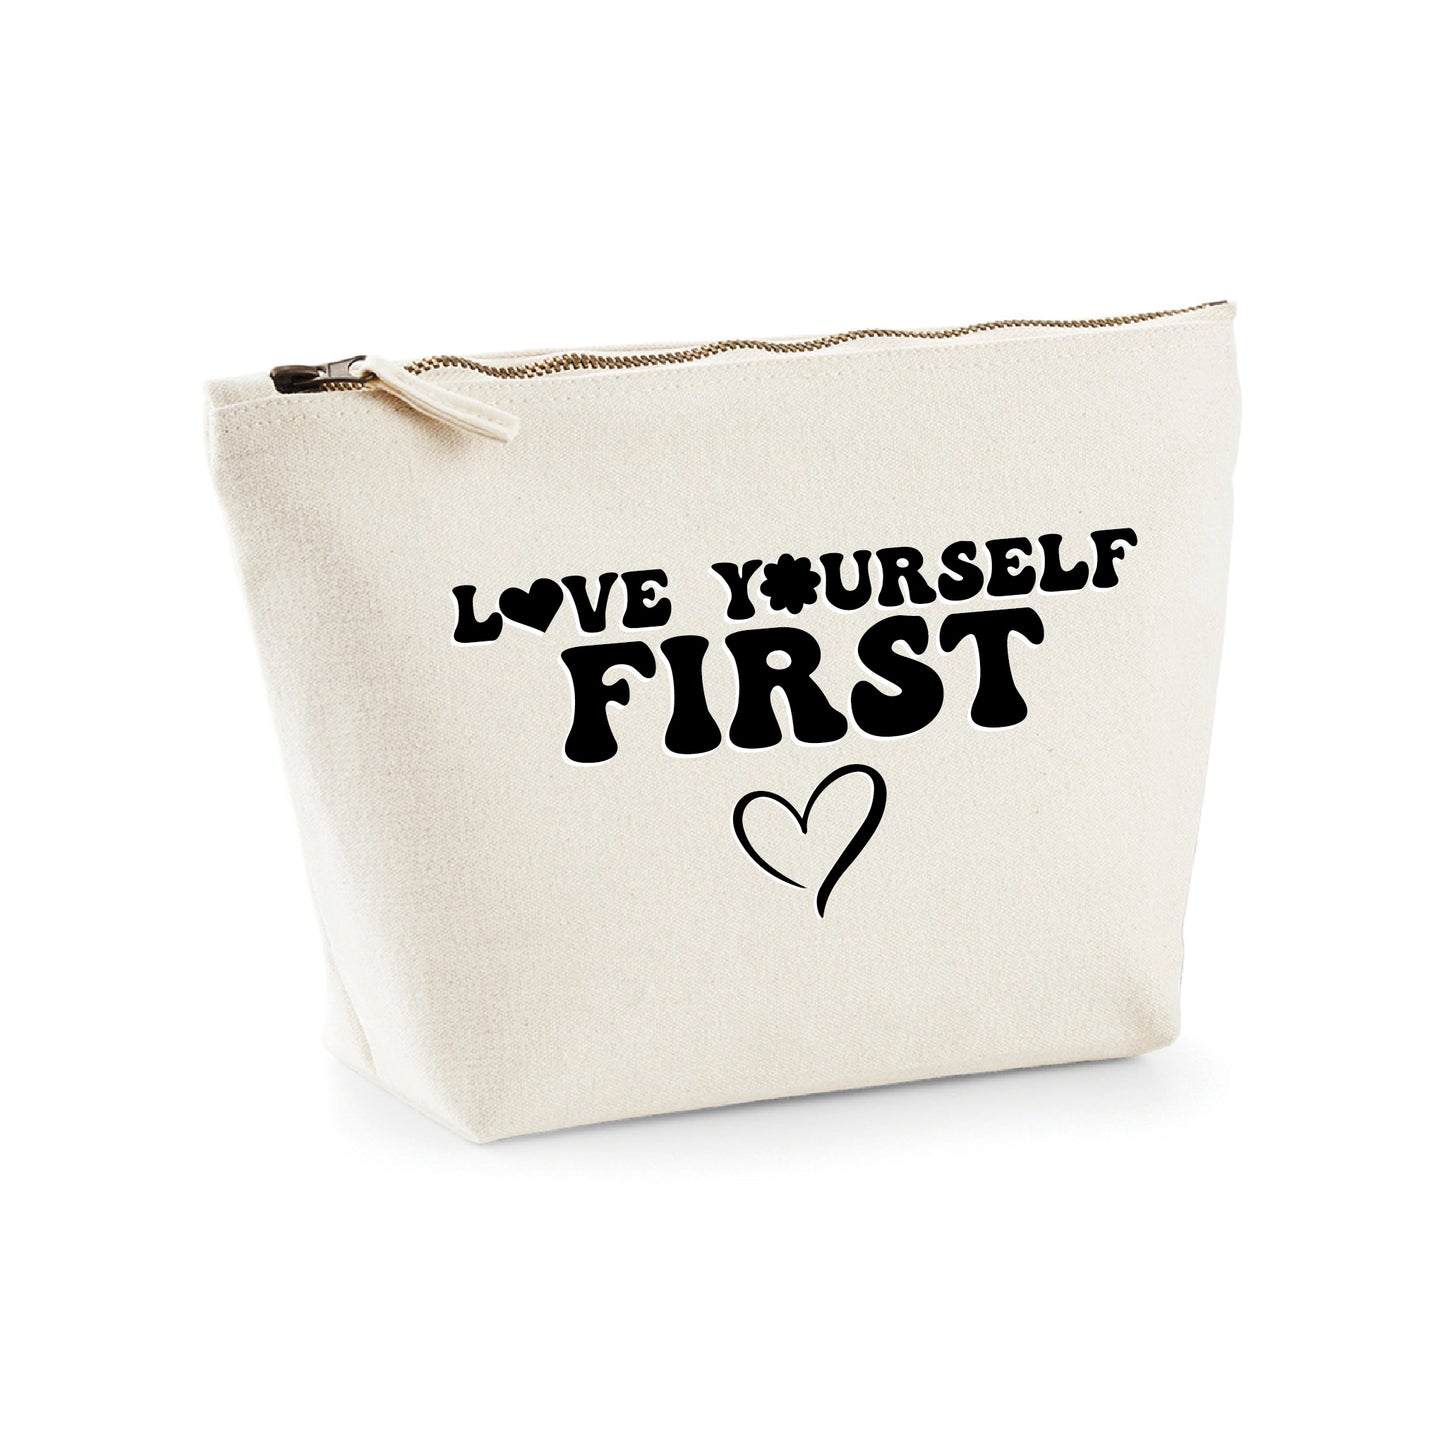 Love Yourself First Canvas Accessory Bag